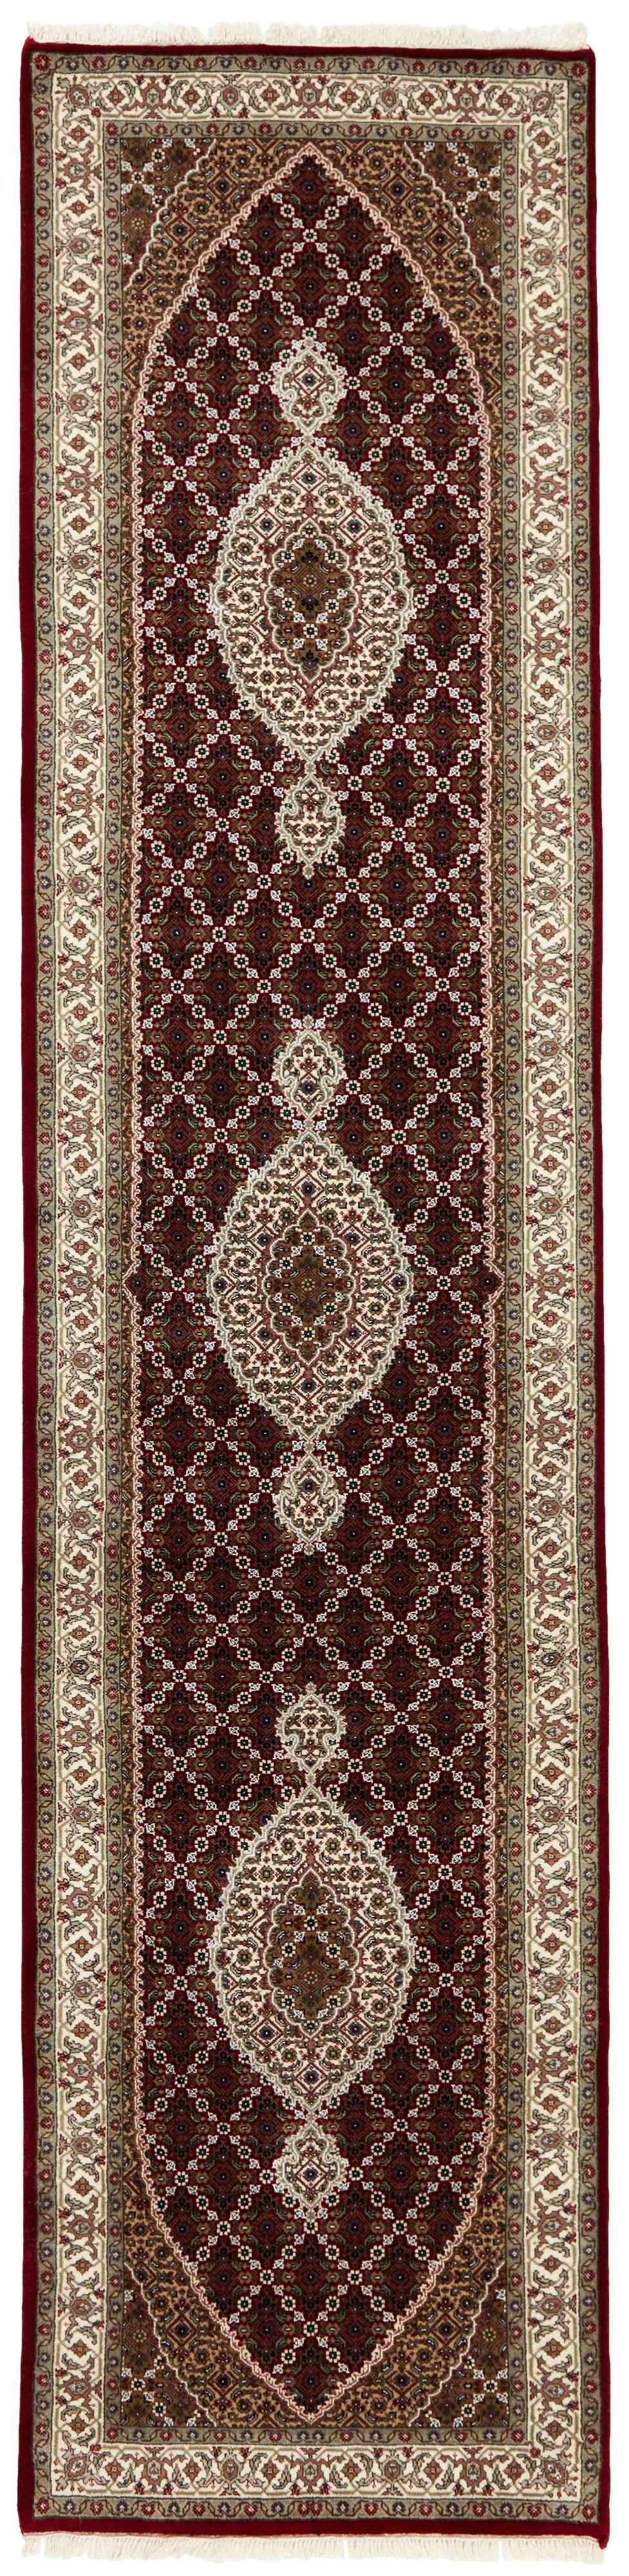 Authentic Oriental runner with traditional geometric and floral design in red, grey, black and beige.